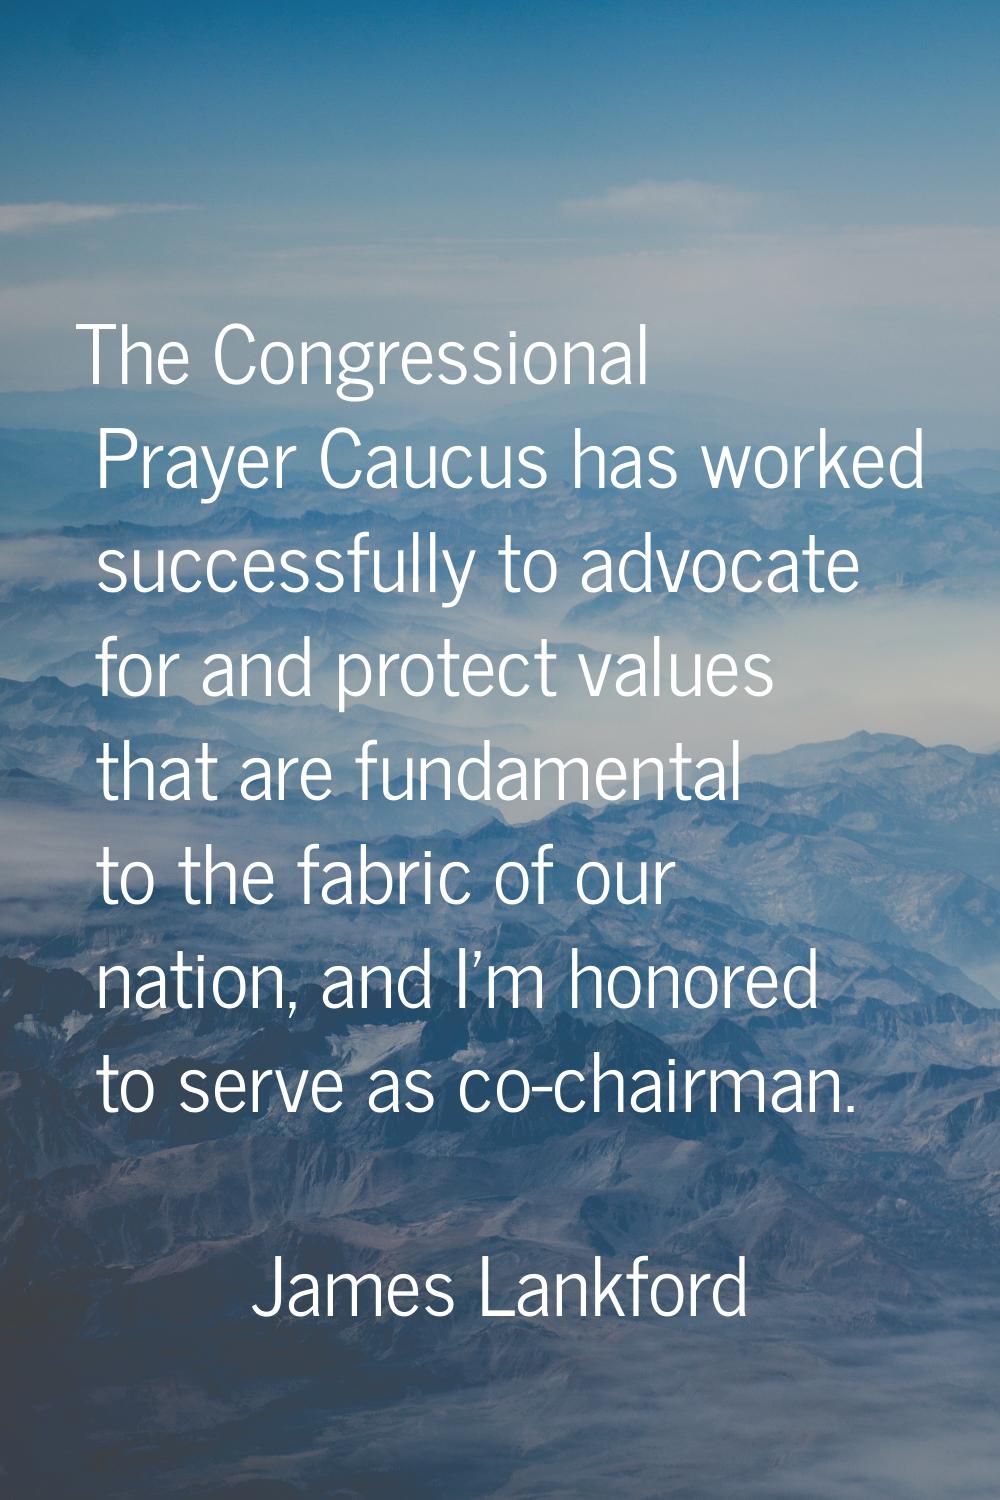 The Congressional Prayer Caucus has worked successfully to advocate for and protect values that are